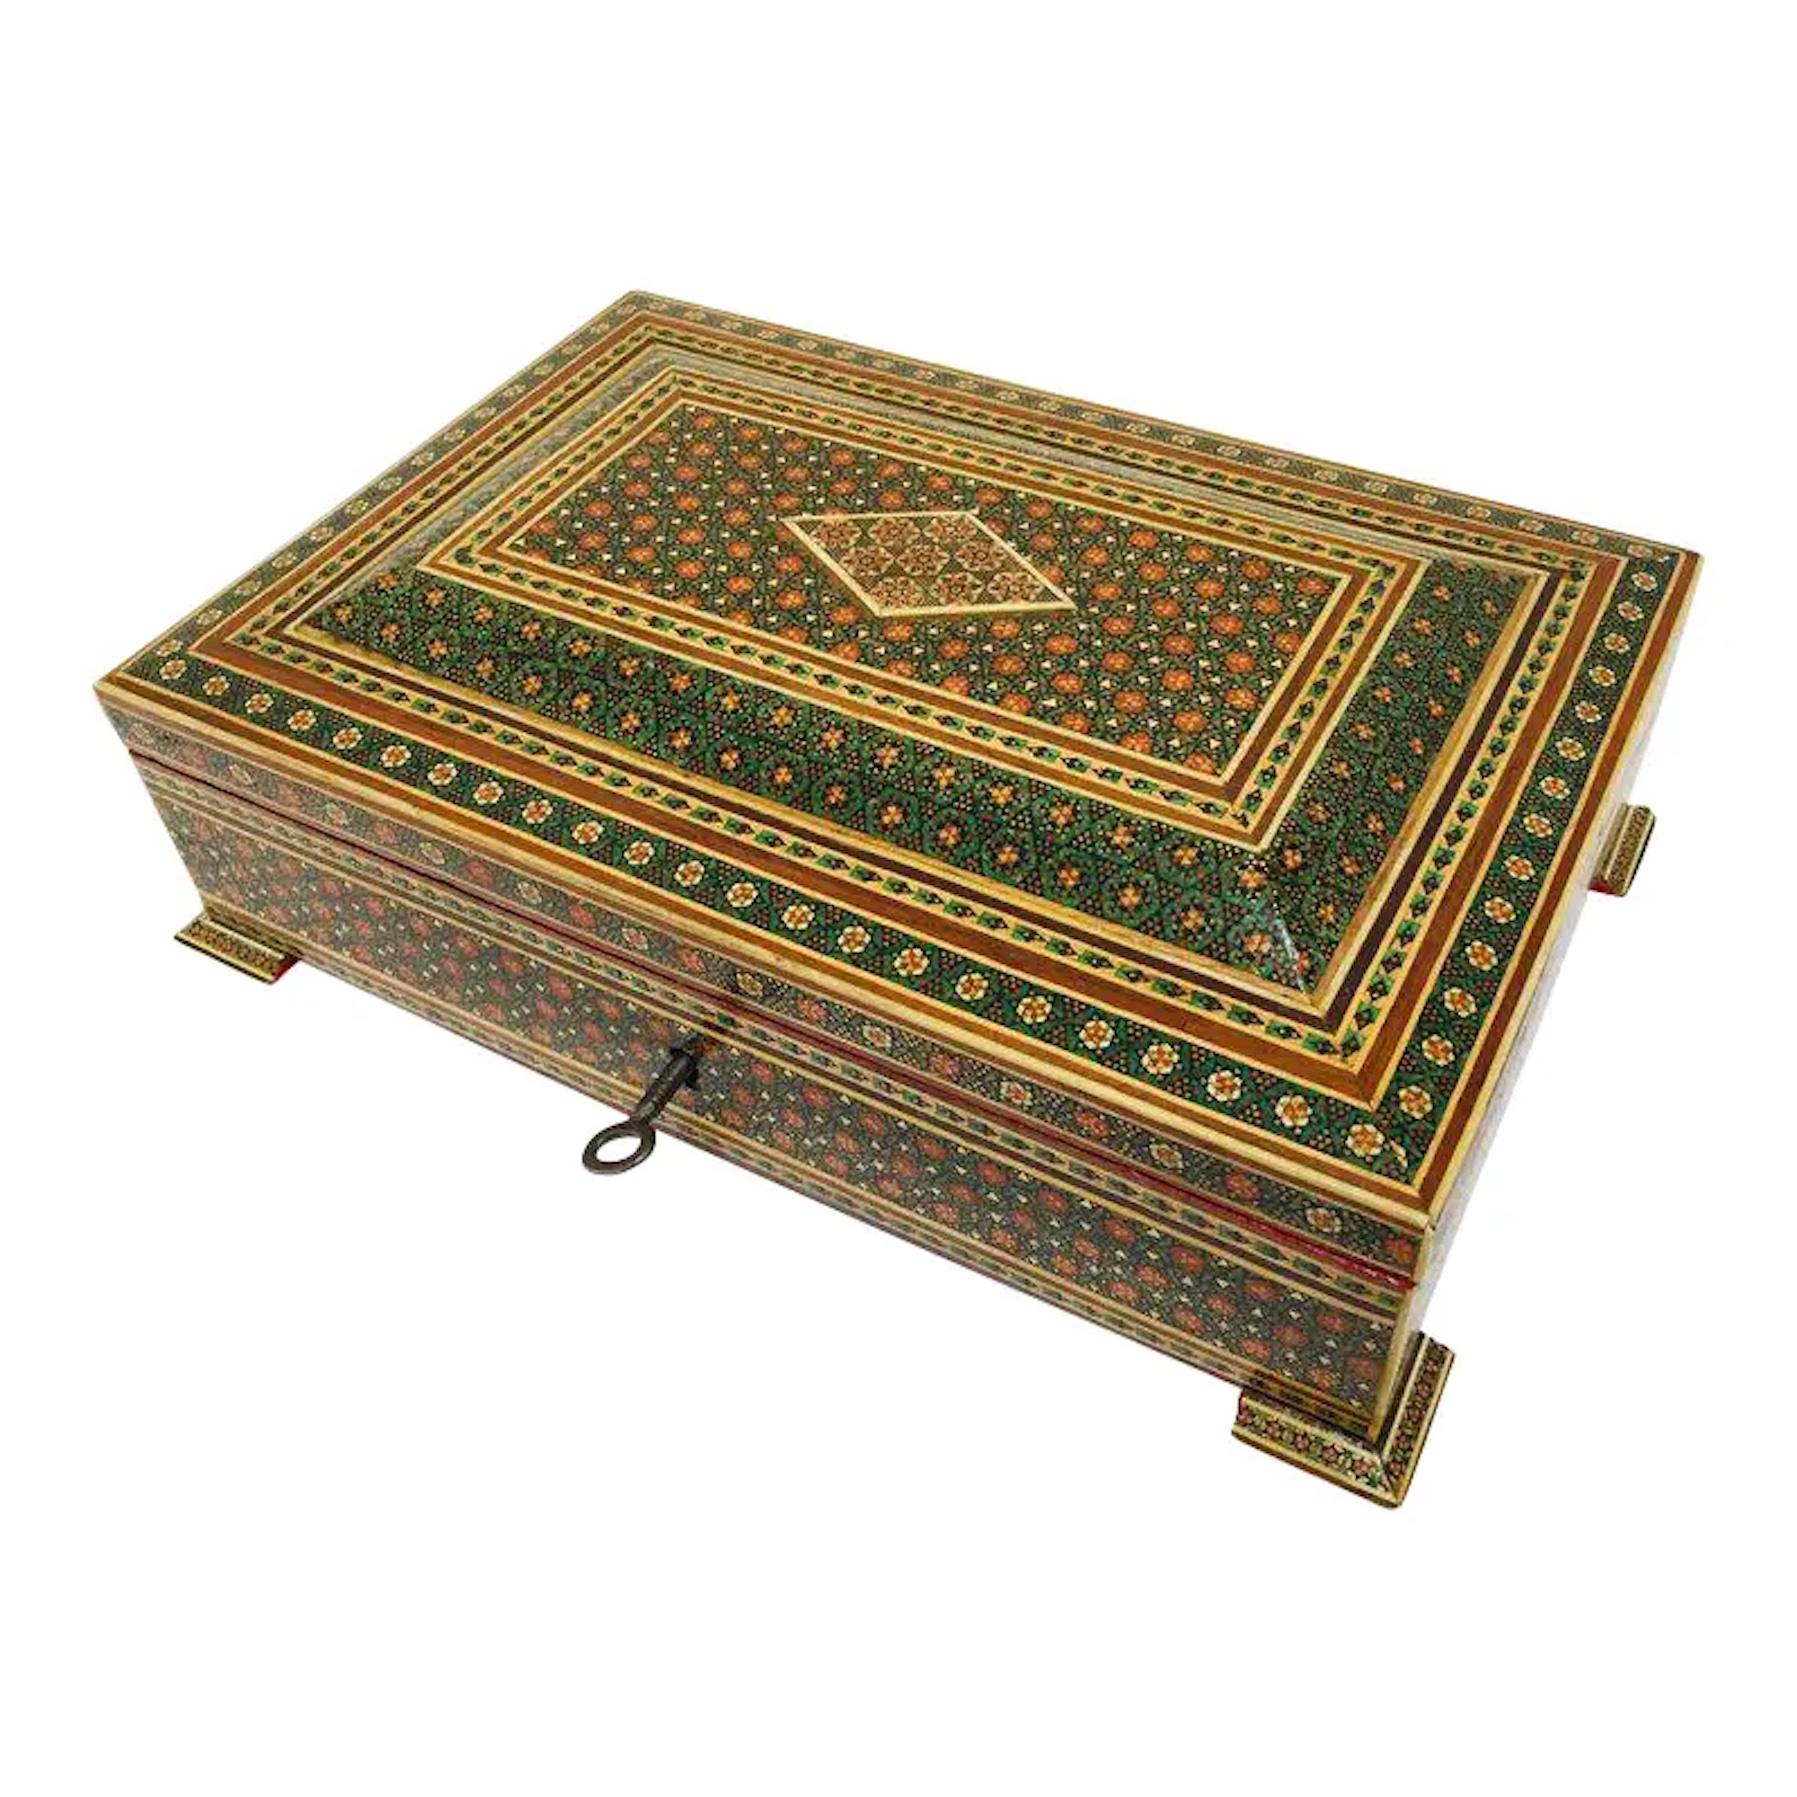 1940s Moorish Anglo-Indian Persian jewelry Mosaic Khatam inlaid box.
Large Anglo-Persian micro mosaic marquetry inlaid box with floral and geometric design. 
Handcrafted Khatam wooden box with very delicate micro mosaic marquetry from the ancient